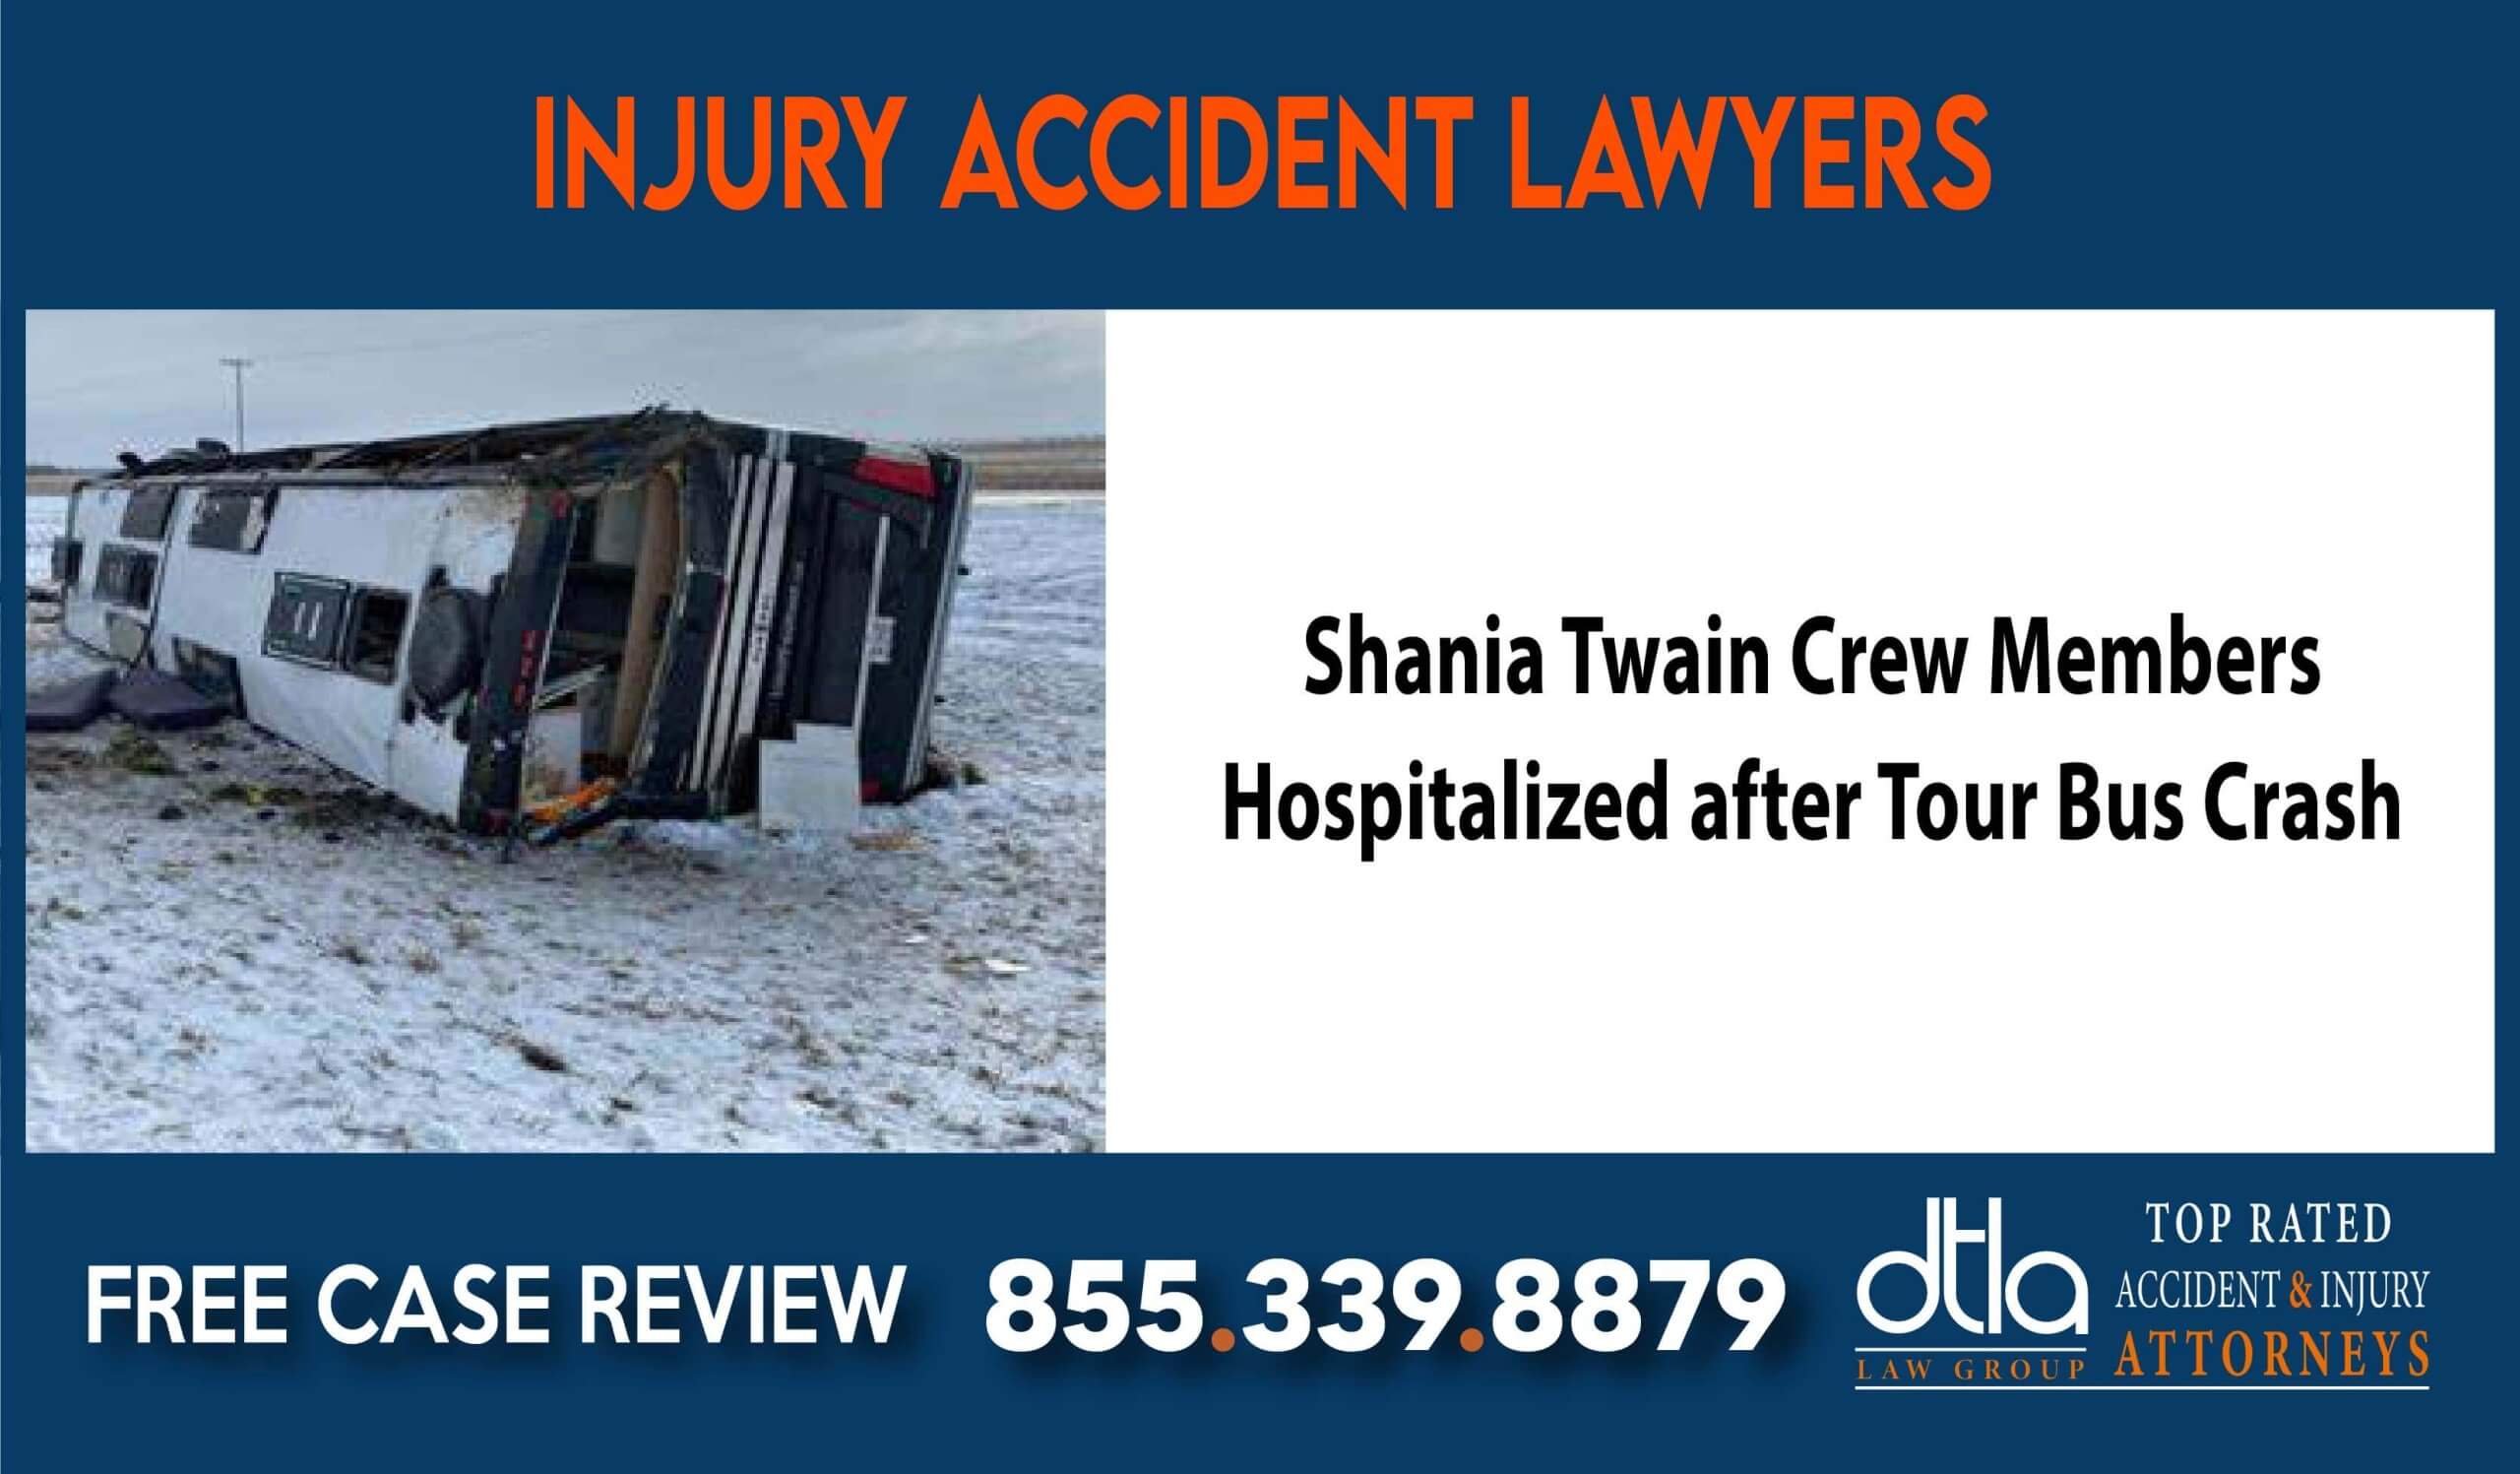 Shania Twain Crew Members Hospitalized after Tour Bus Crash lawyer attorney incident liability sue lawsuit